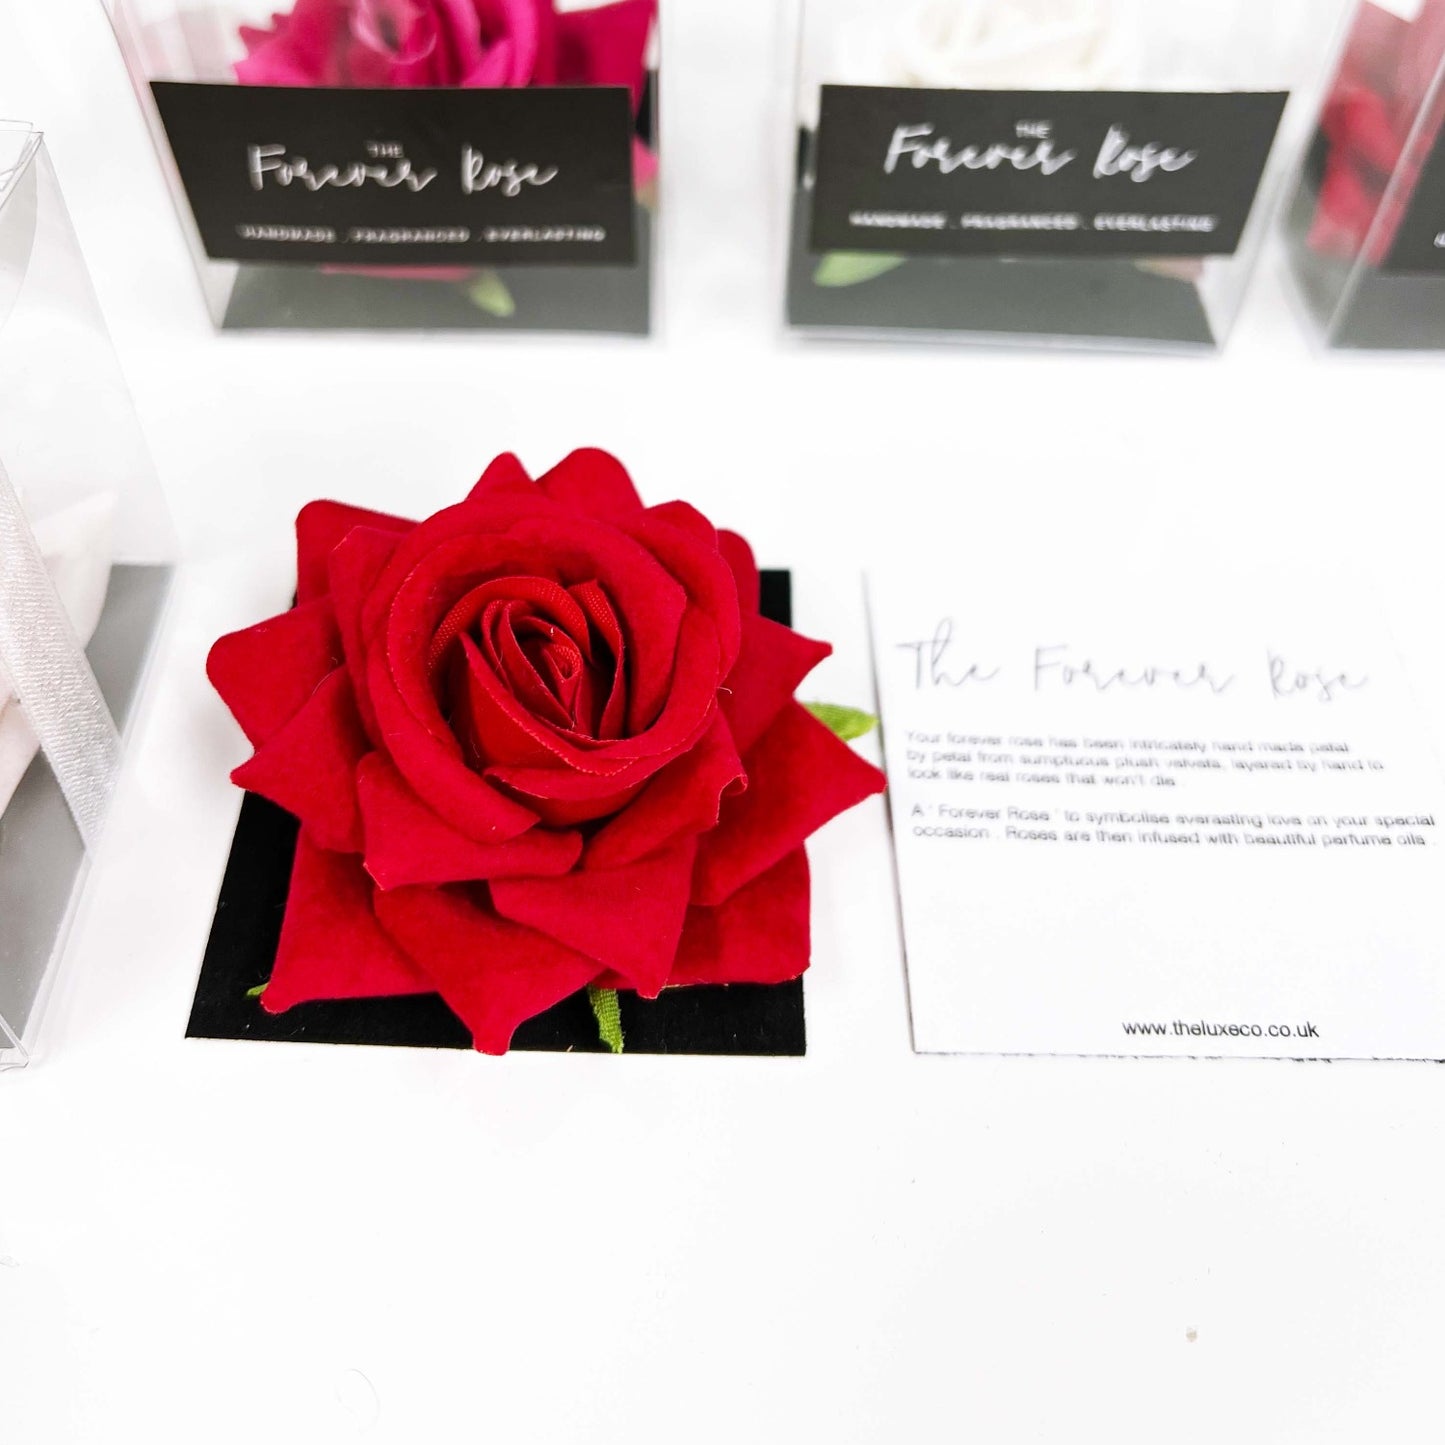 Red Rose Gift For her - scented everlasting handmade roses to symbolise everlasting love and beauty